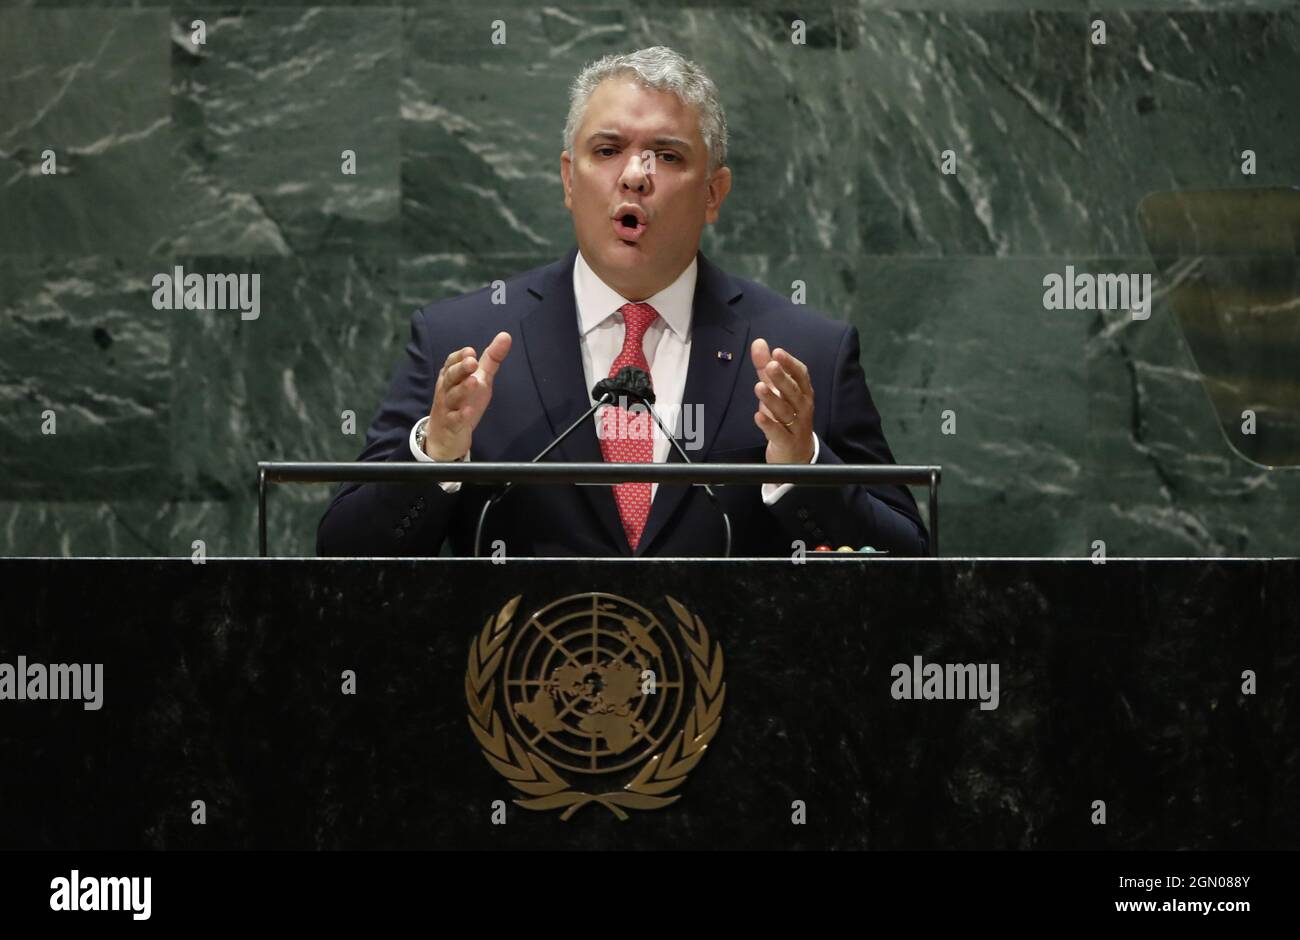 New York, United States. 21st Sep, 2021. Colombia's President Ivan Duque addresses the 76th Session of the U.N. General Assembly on Tuesday, Sept. 21, 2021 in New York City. (Pool Photo by John Minchillo/UPI) Credit: UPI/Alamy Live News Stock Photo